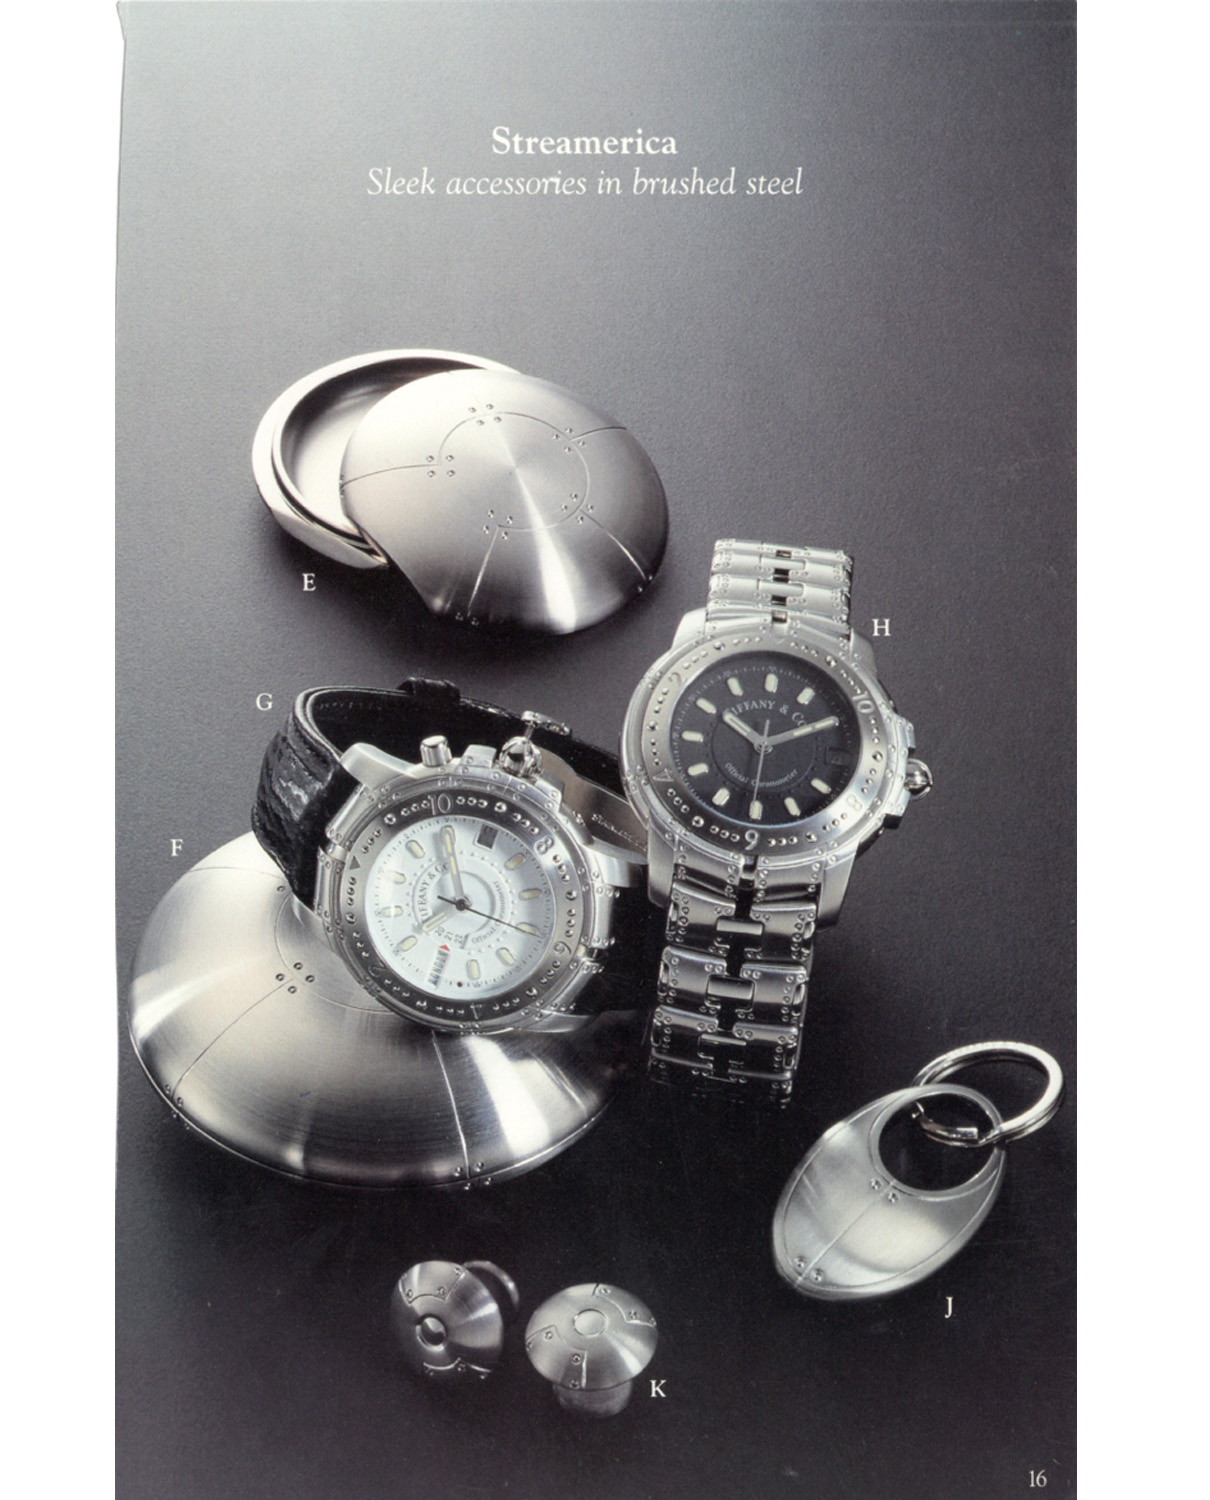 Tiffany & Co. Blue Book Catalog from the late 90's Sleek accessories in brushed steel Streamerica Collection: Perisphere Nesting Boxes, the World Timer Automatic Watch with white face and leather band, the Automatic Chronometer, geodome cufflinks, Curviline key ring.